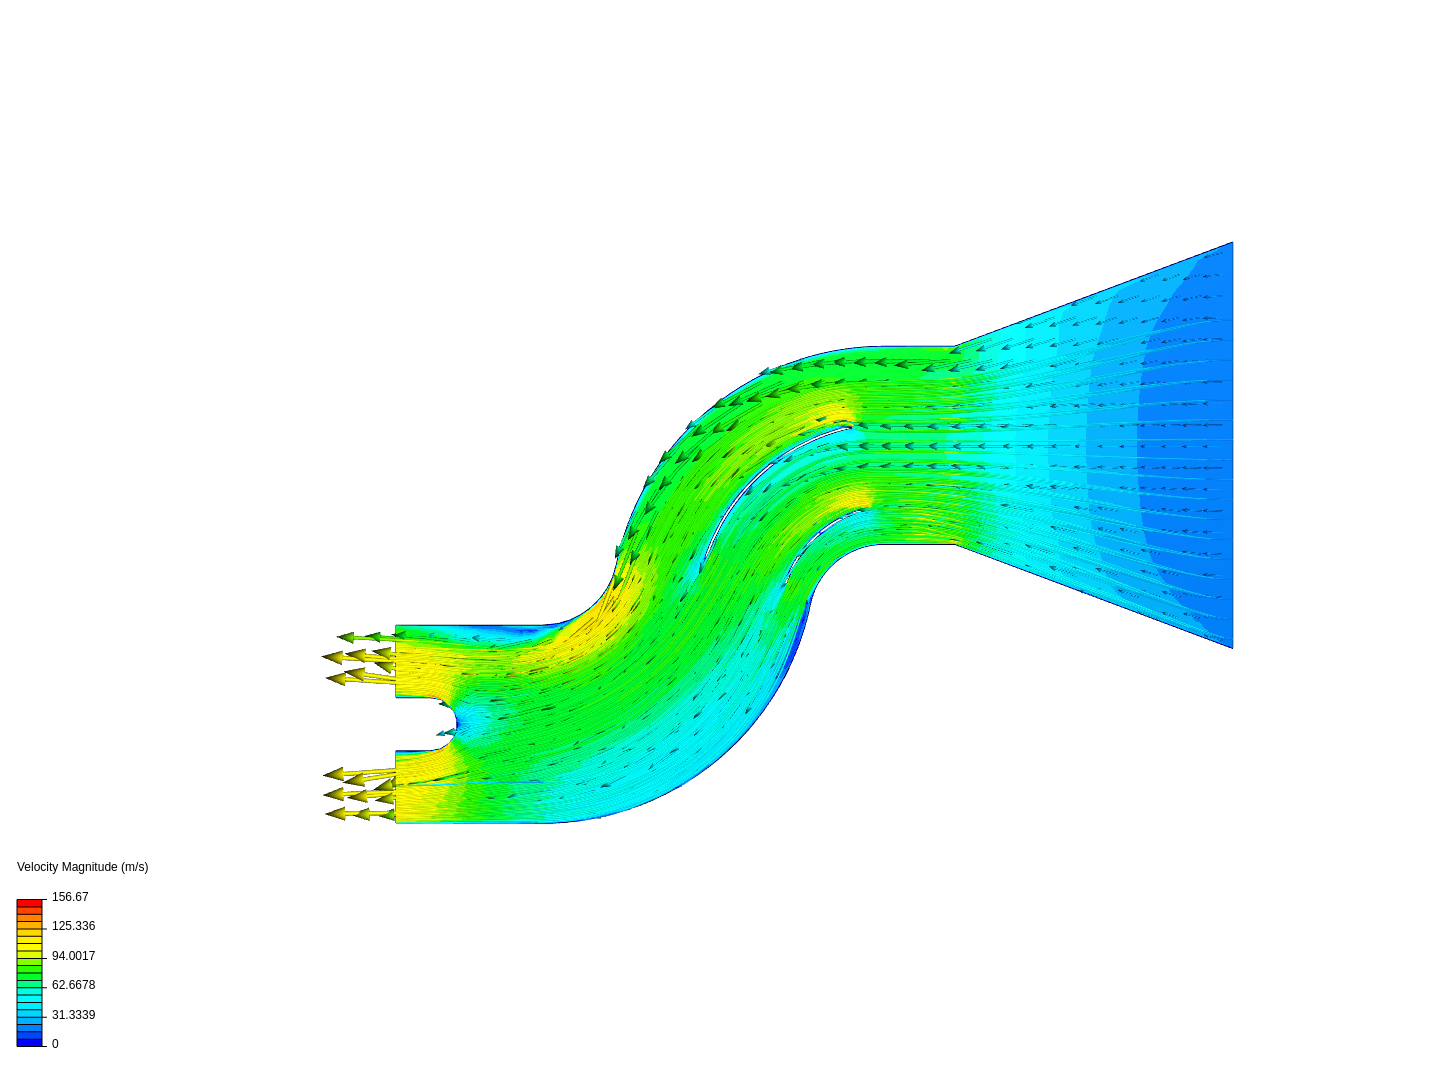 Air Duct Fluid flow analysis image